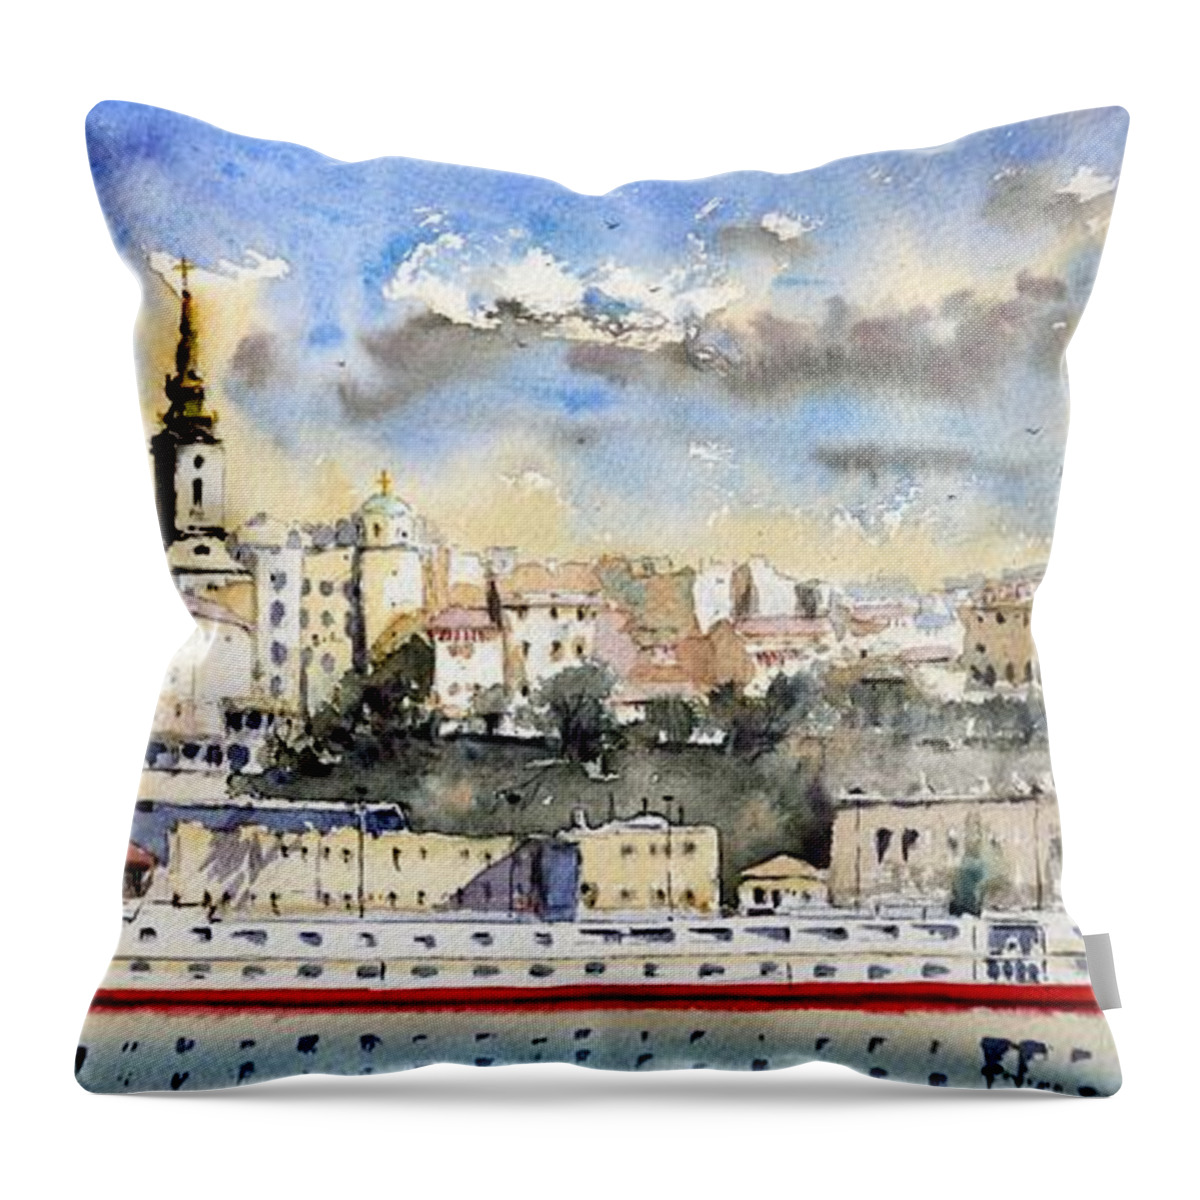 Beograd Throw Pillow featuring the painting Skyline Belgrade by Nenad Kojic Watercolours